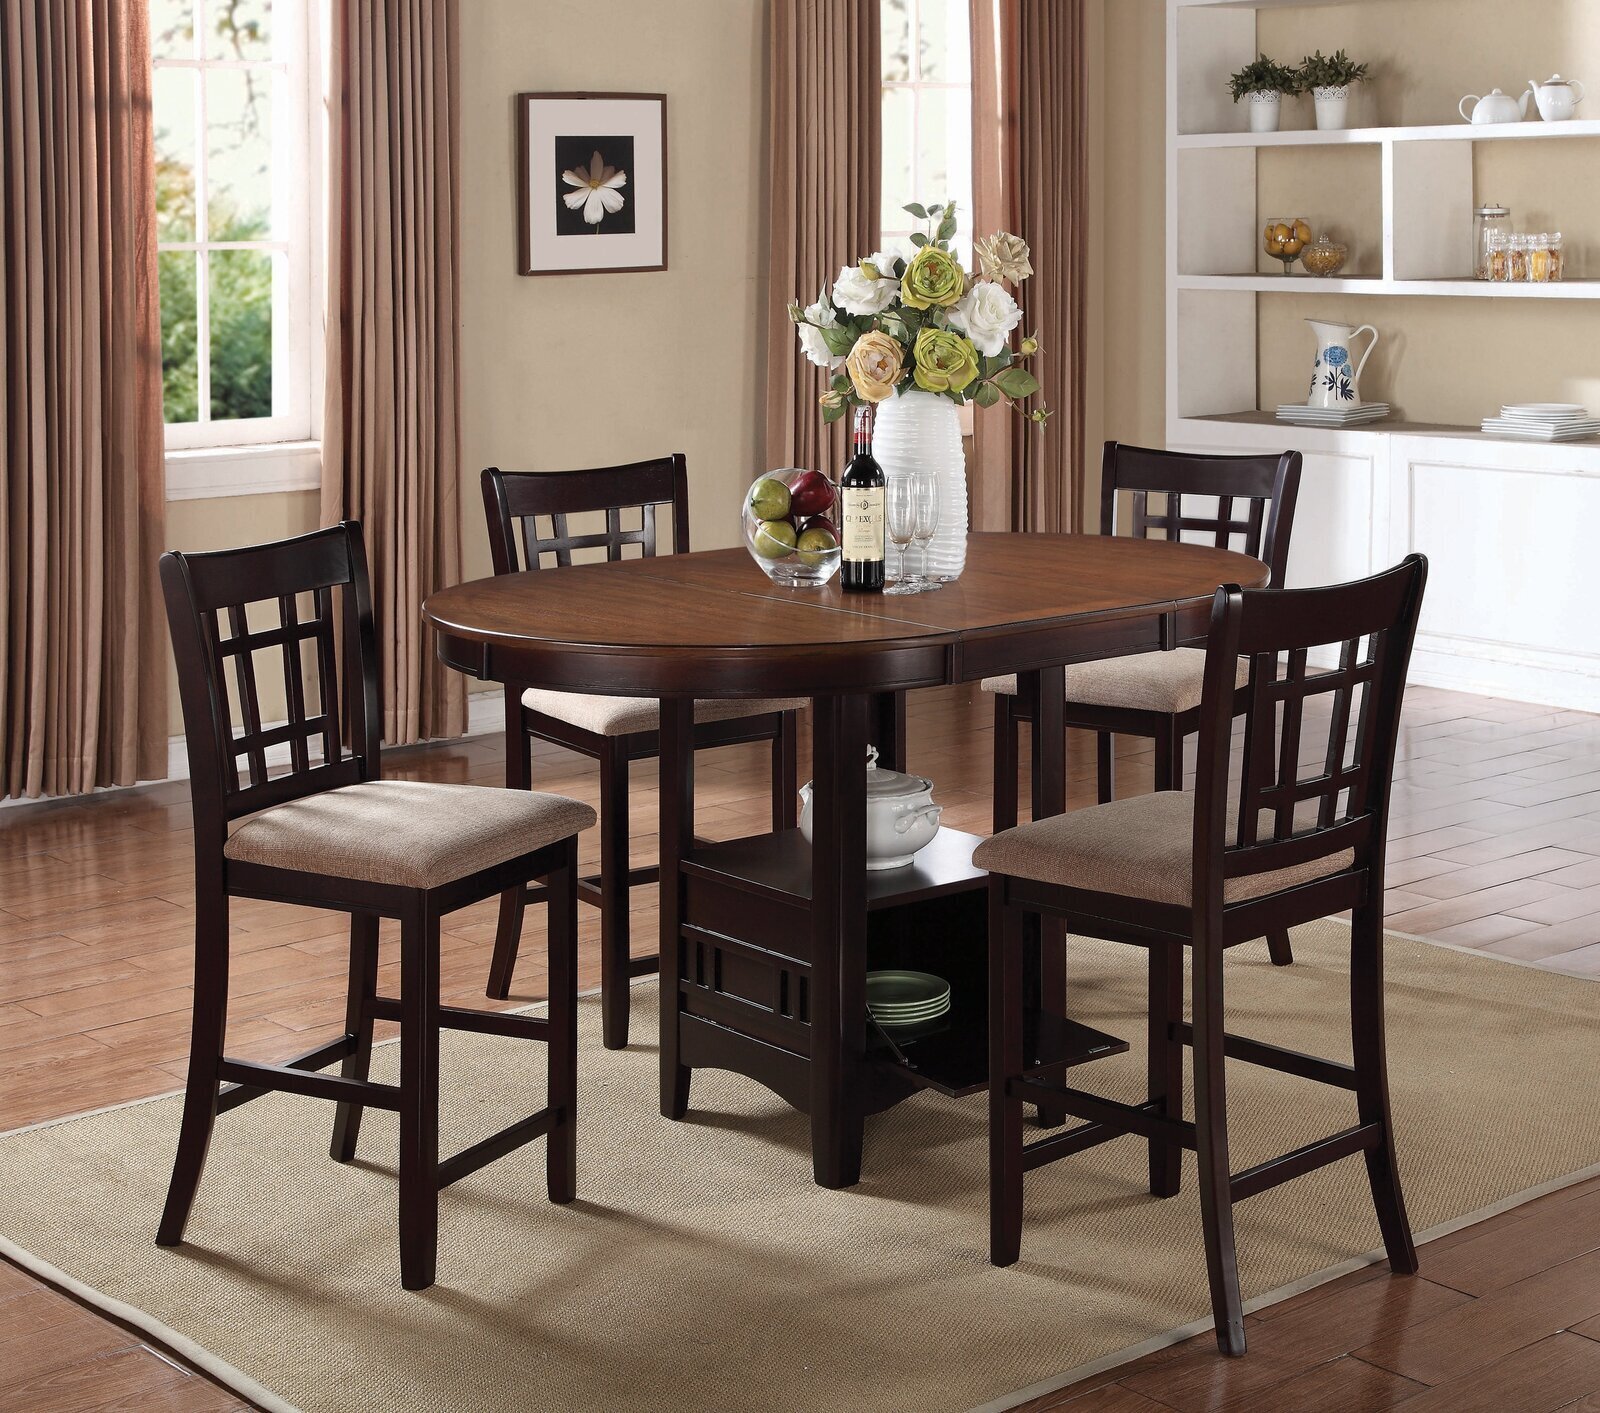 Folding oval dining table with storage